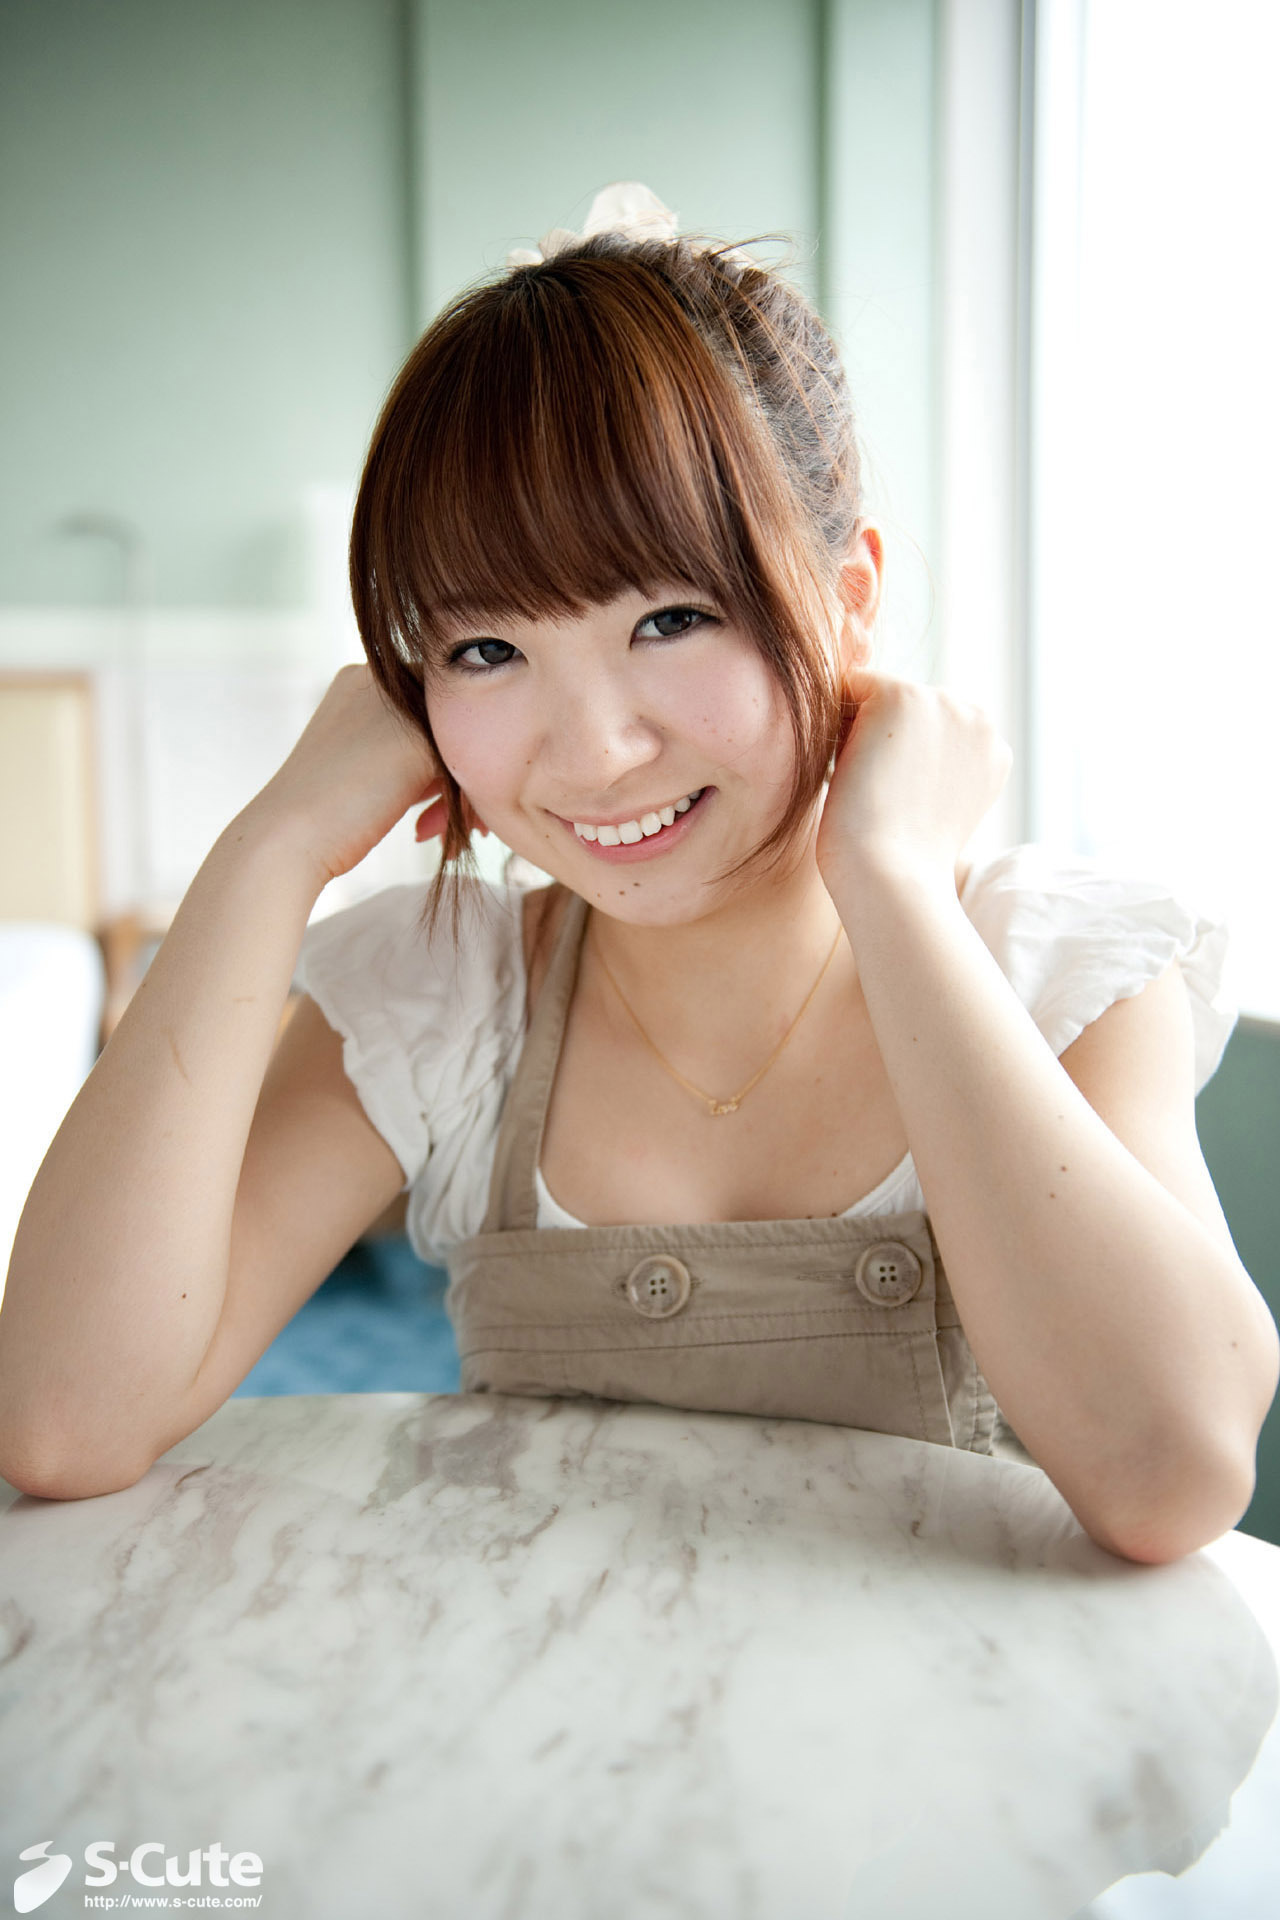 Man Hitomi Fujiwara pre-surgery was the cutest thing, why did she have to f...